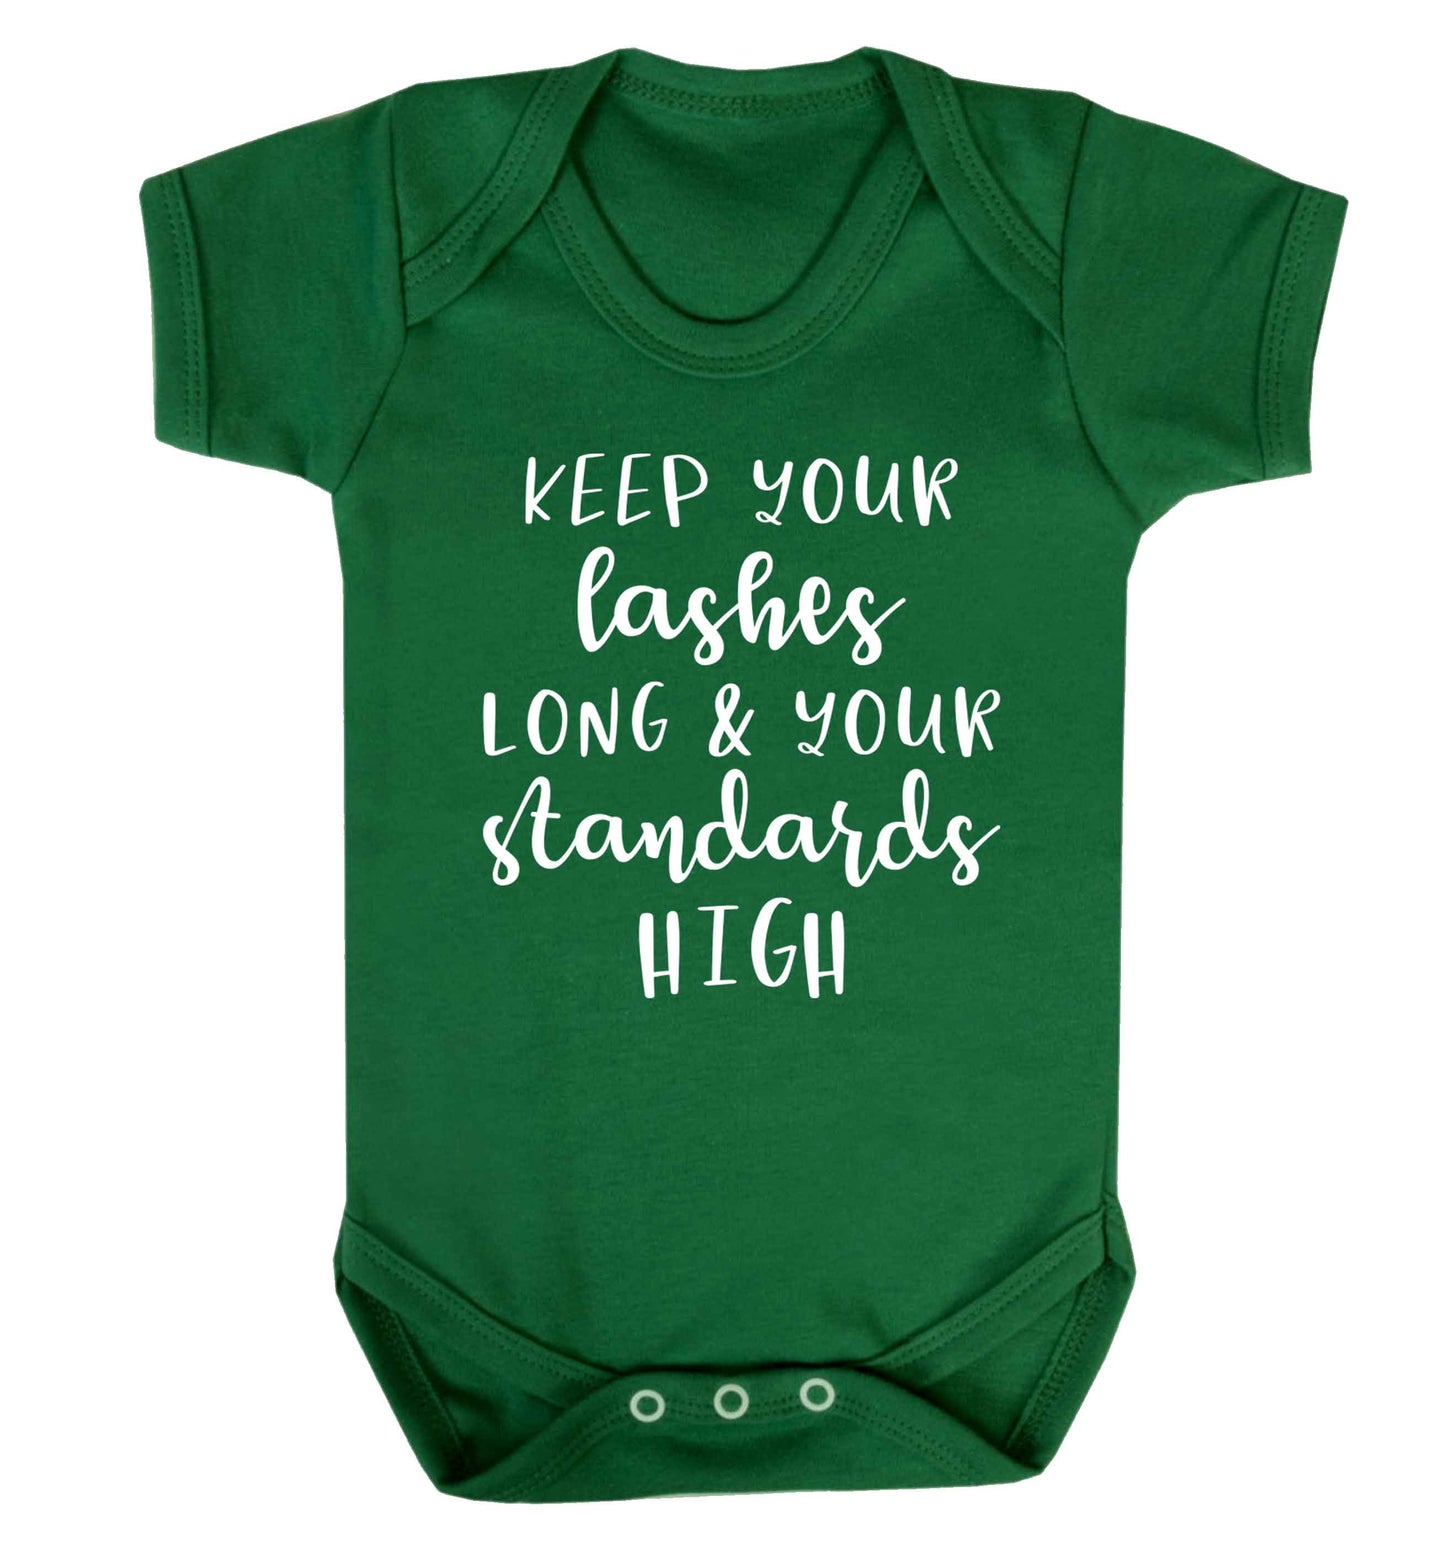 Keep your lashes long and your standards high Baby Vest green 18-24 months